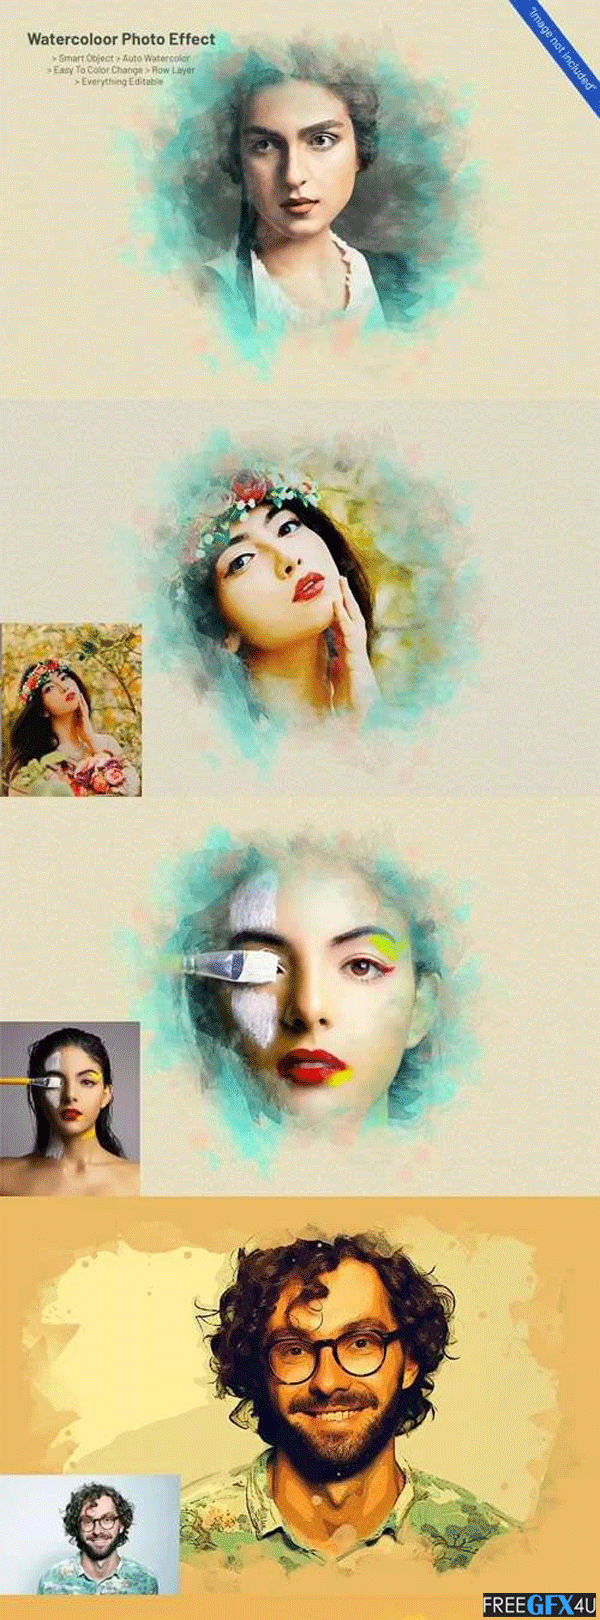 2 Watercolor Photo Effects